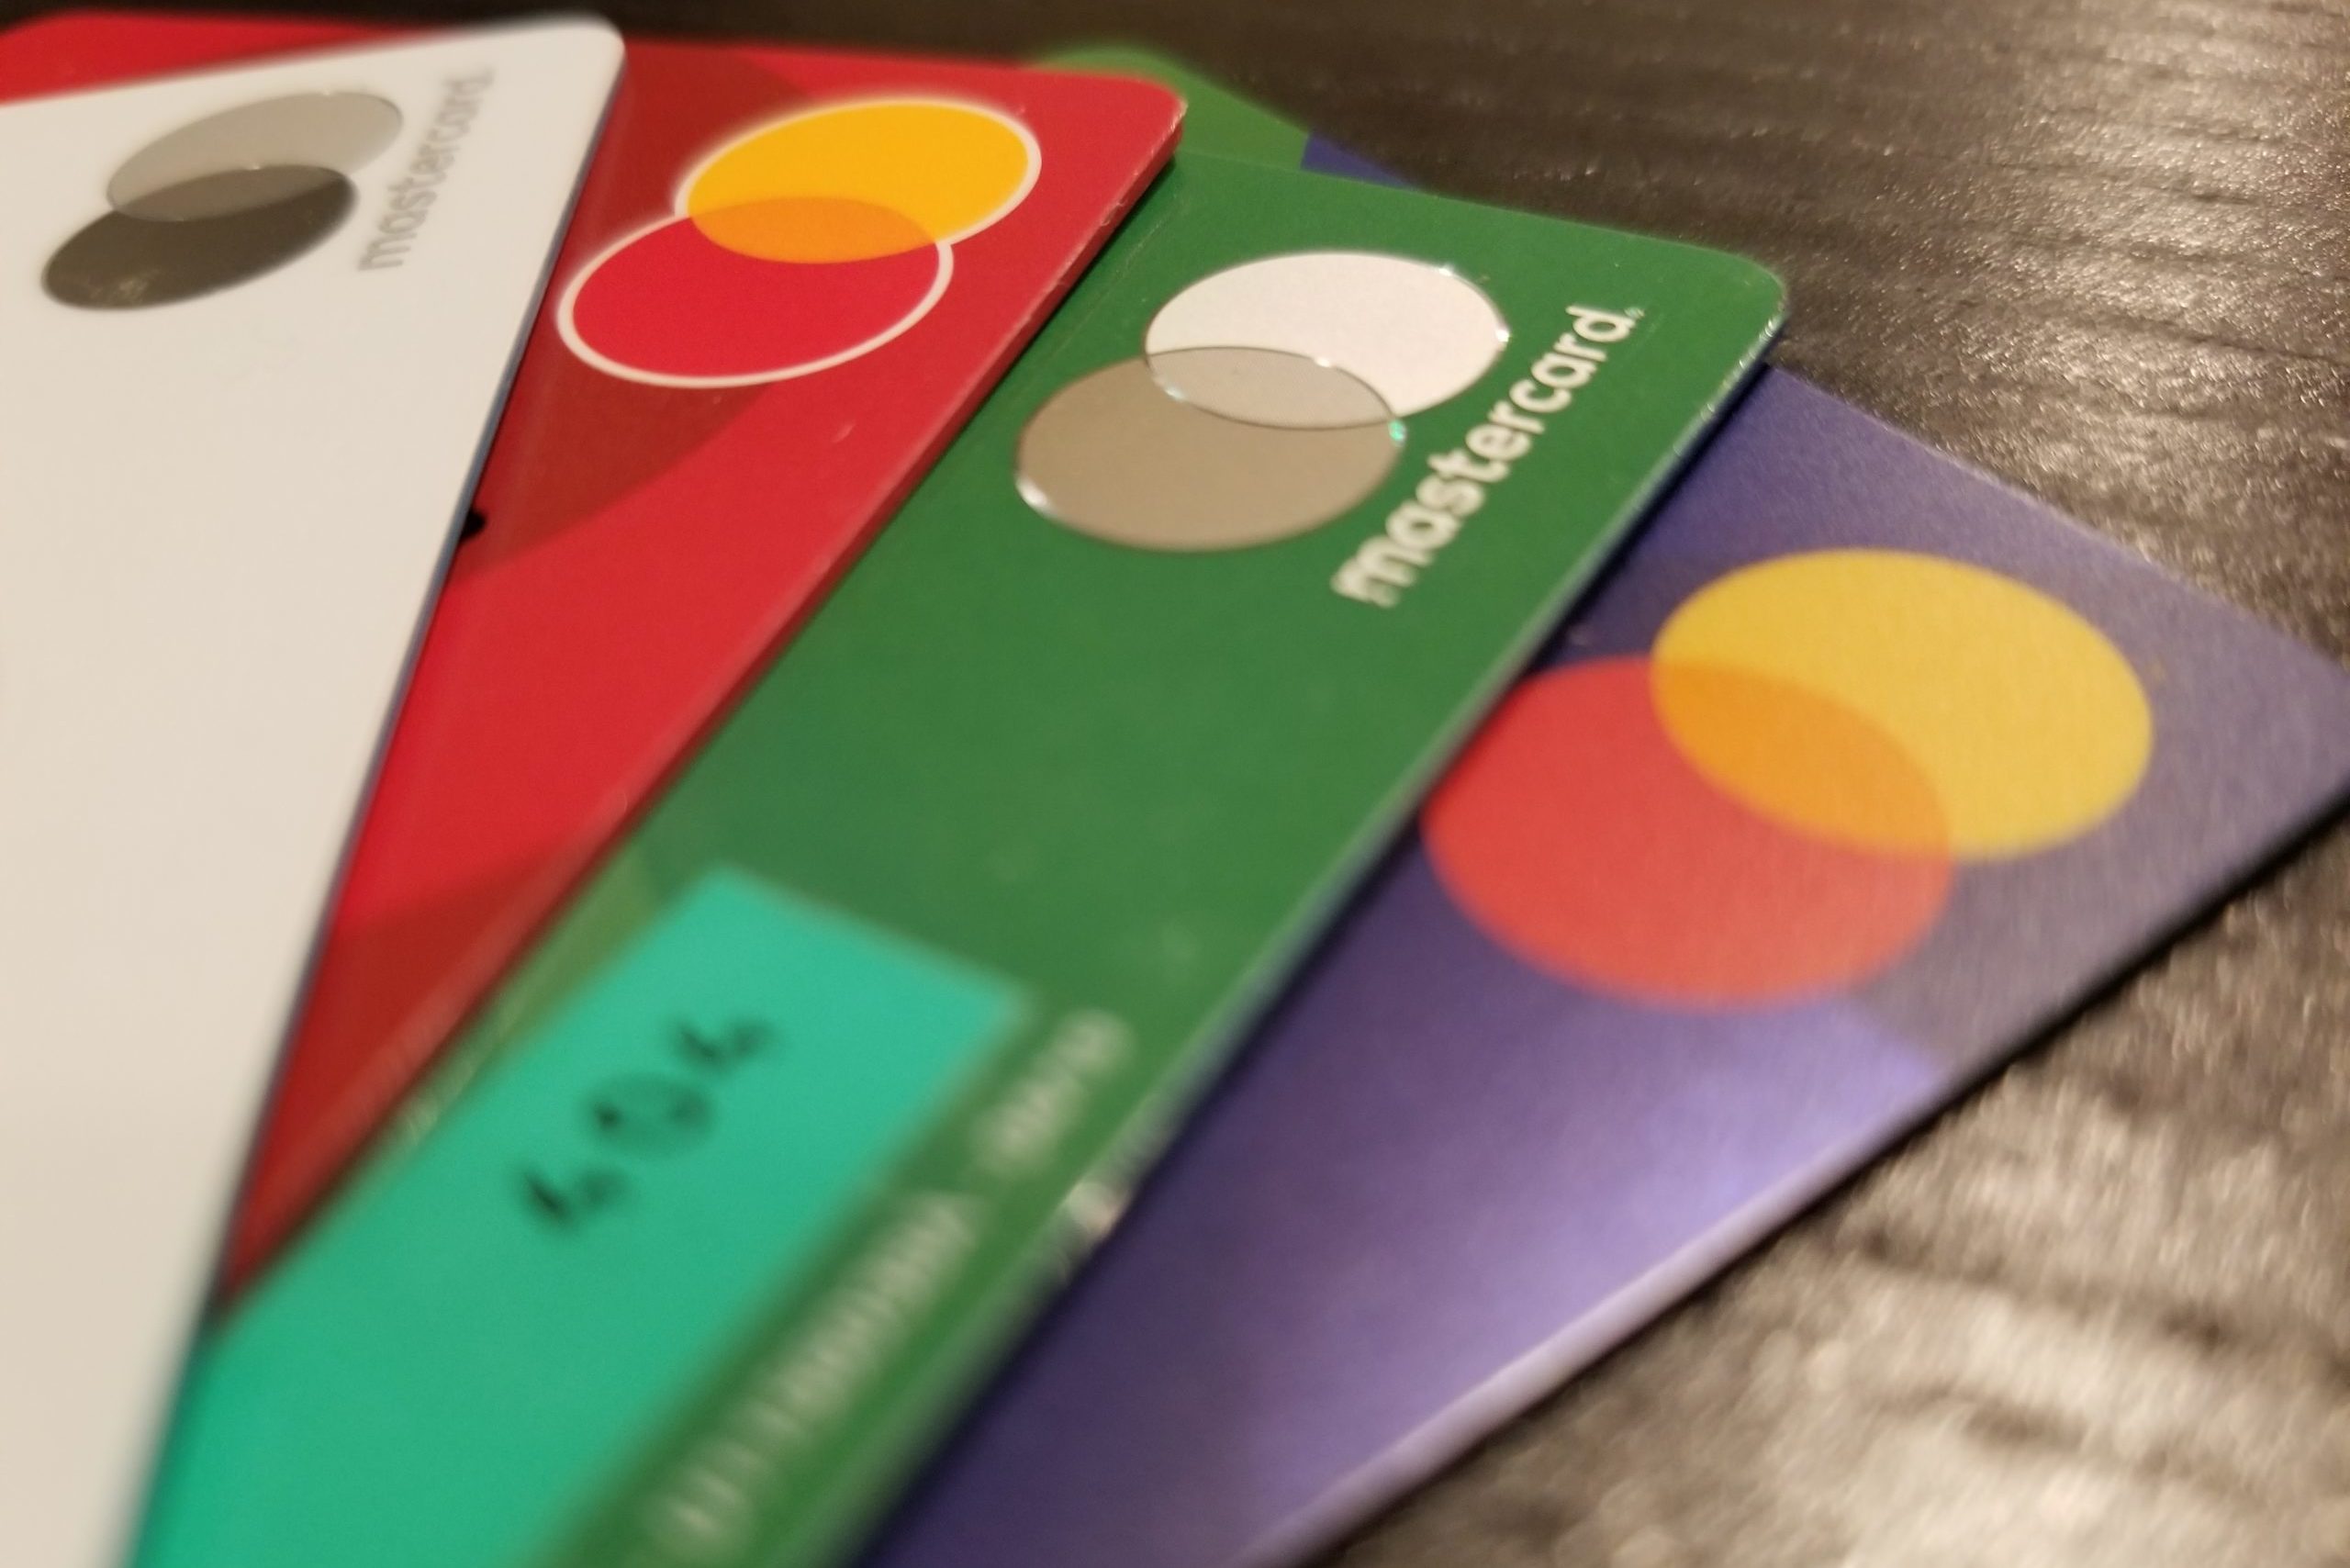 Mastercard Cardholders Get New Benefits with Lyft, Booking.com and More - Miles to Memories